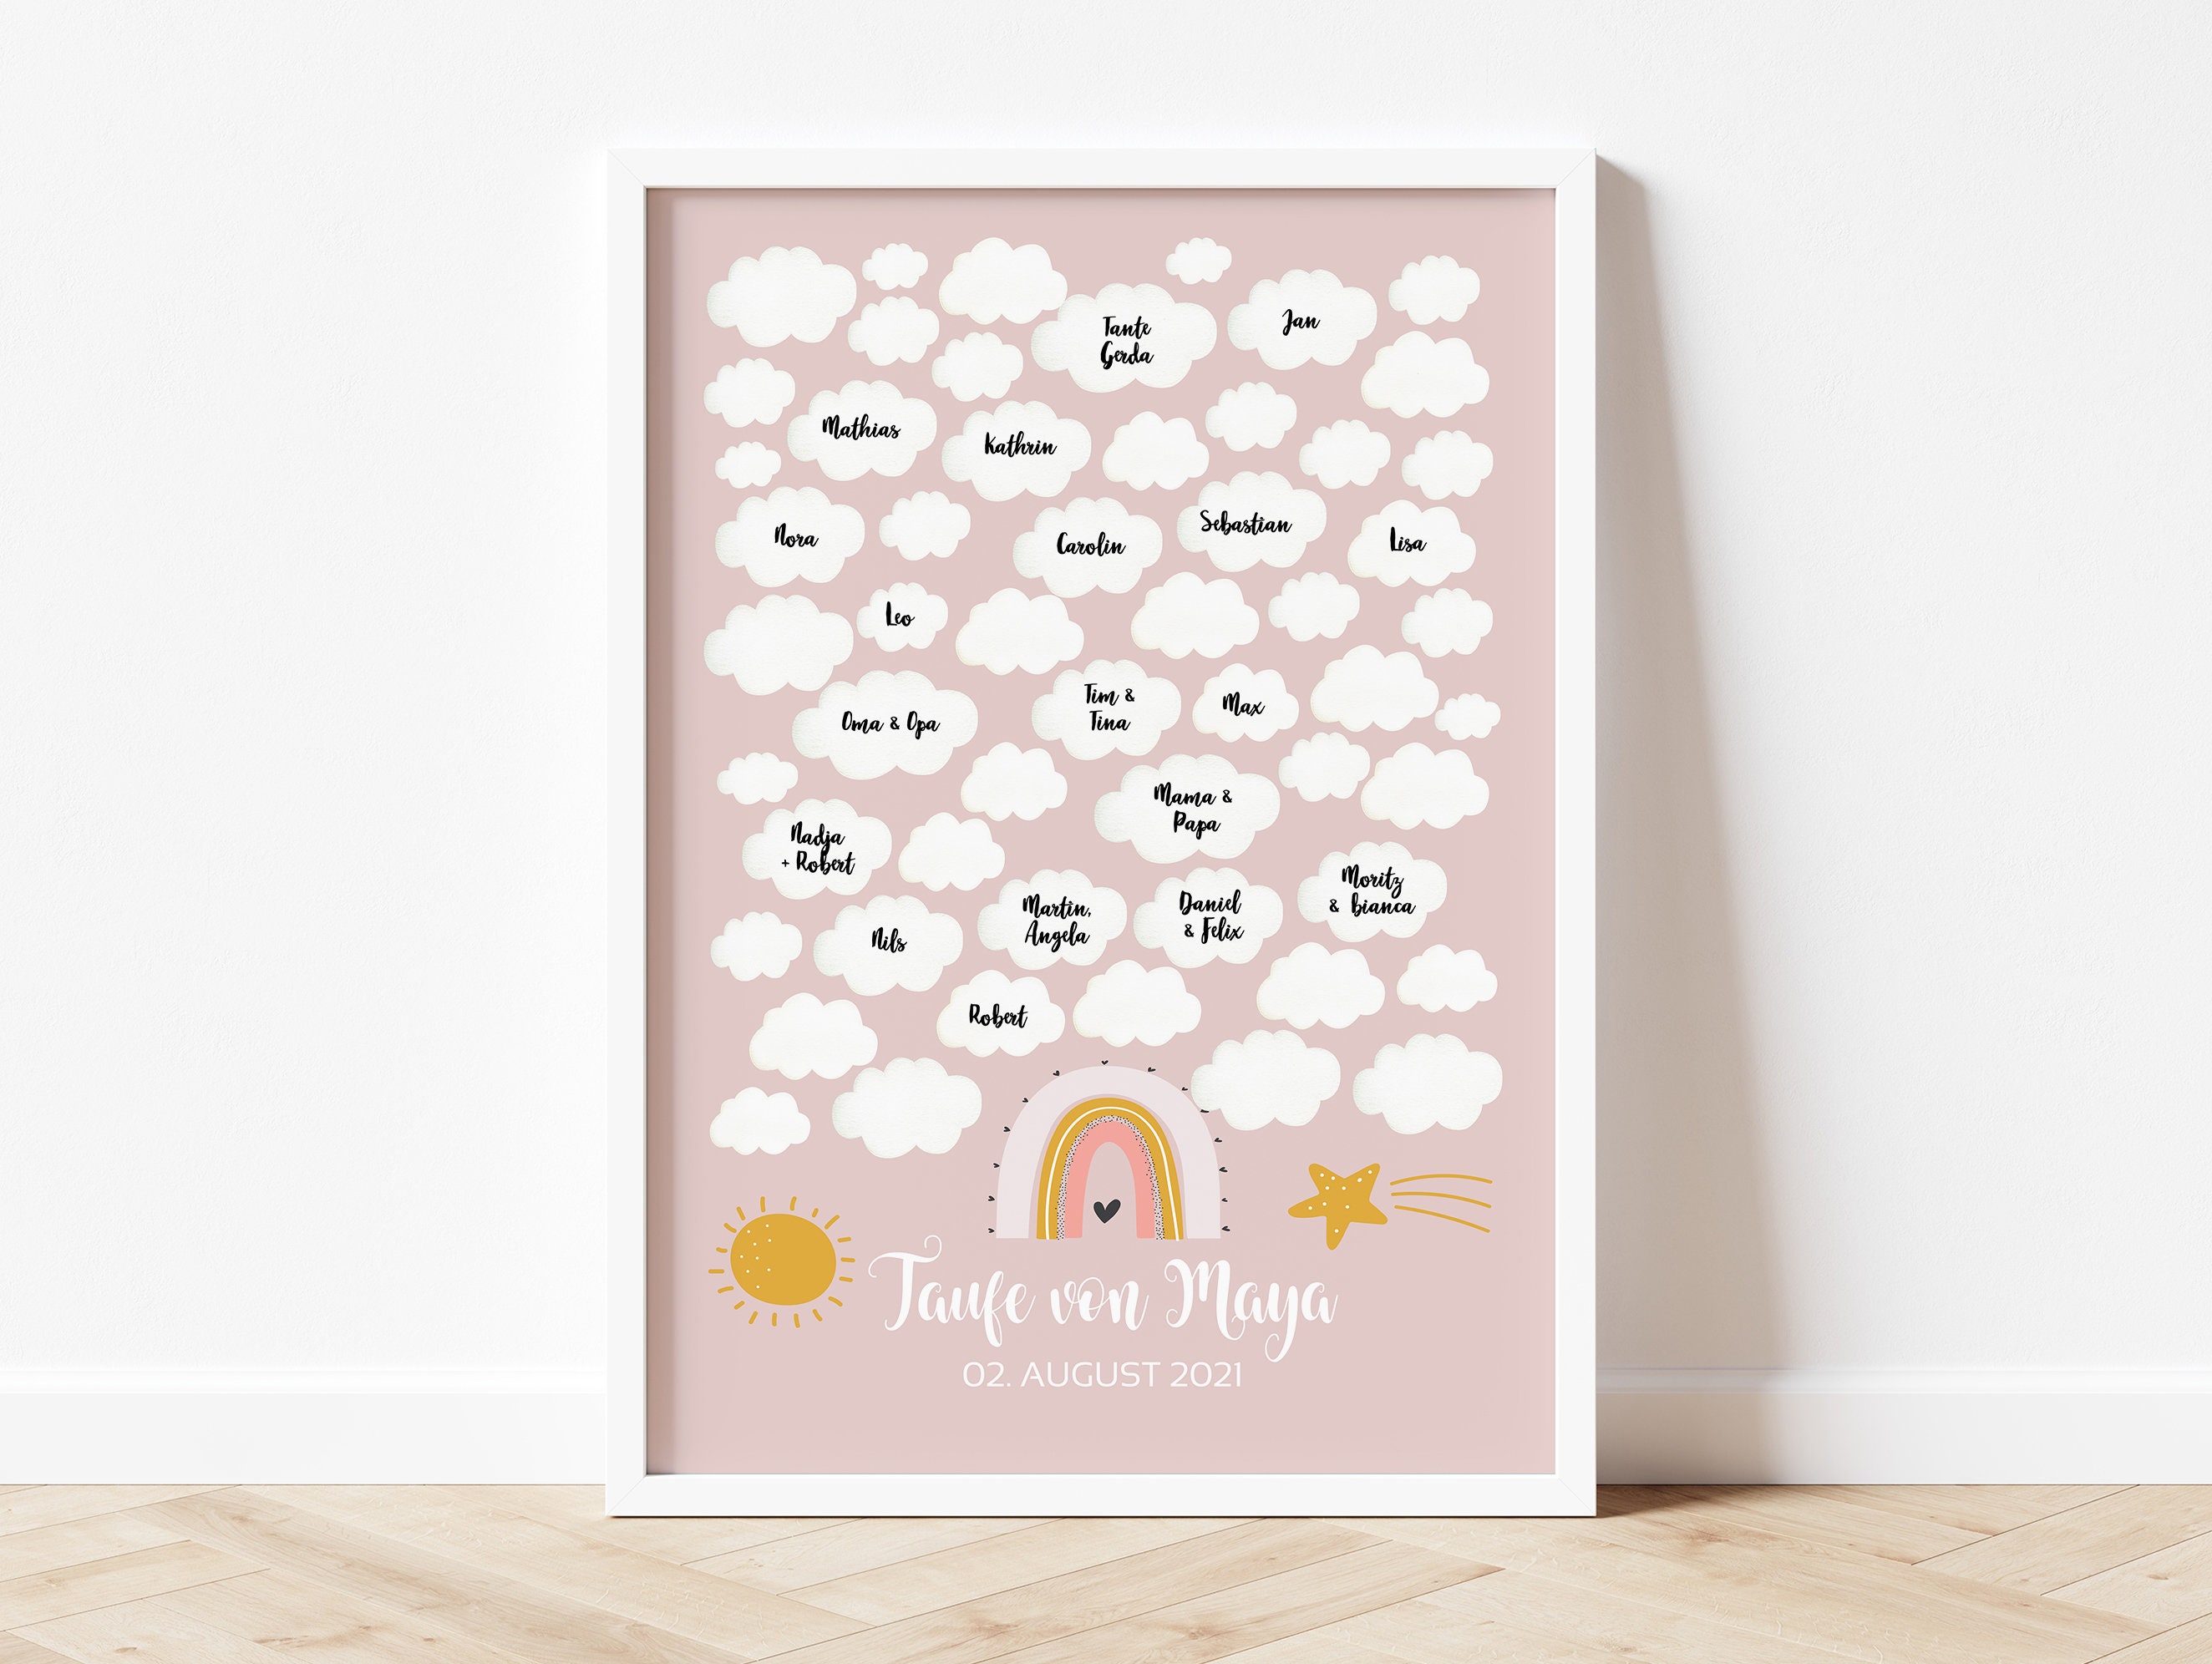 GUEST POSTER Baptism, Guestbook, & Rainbows, or Pink Blue, or Poster Gift, Digital, Clouds Poster Etsy Personalized, - Baptism, Guestbook